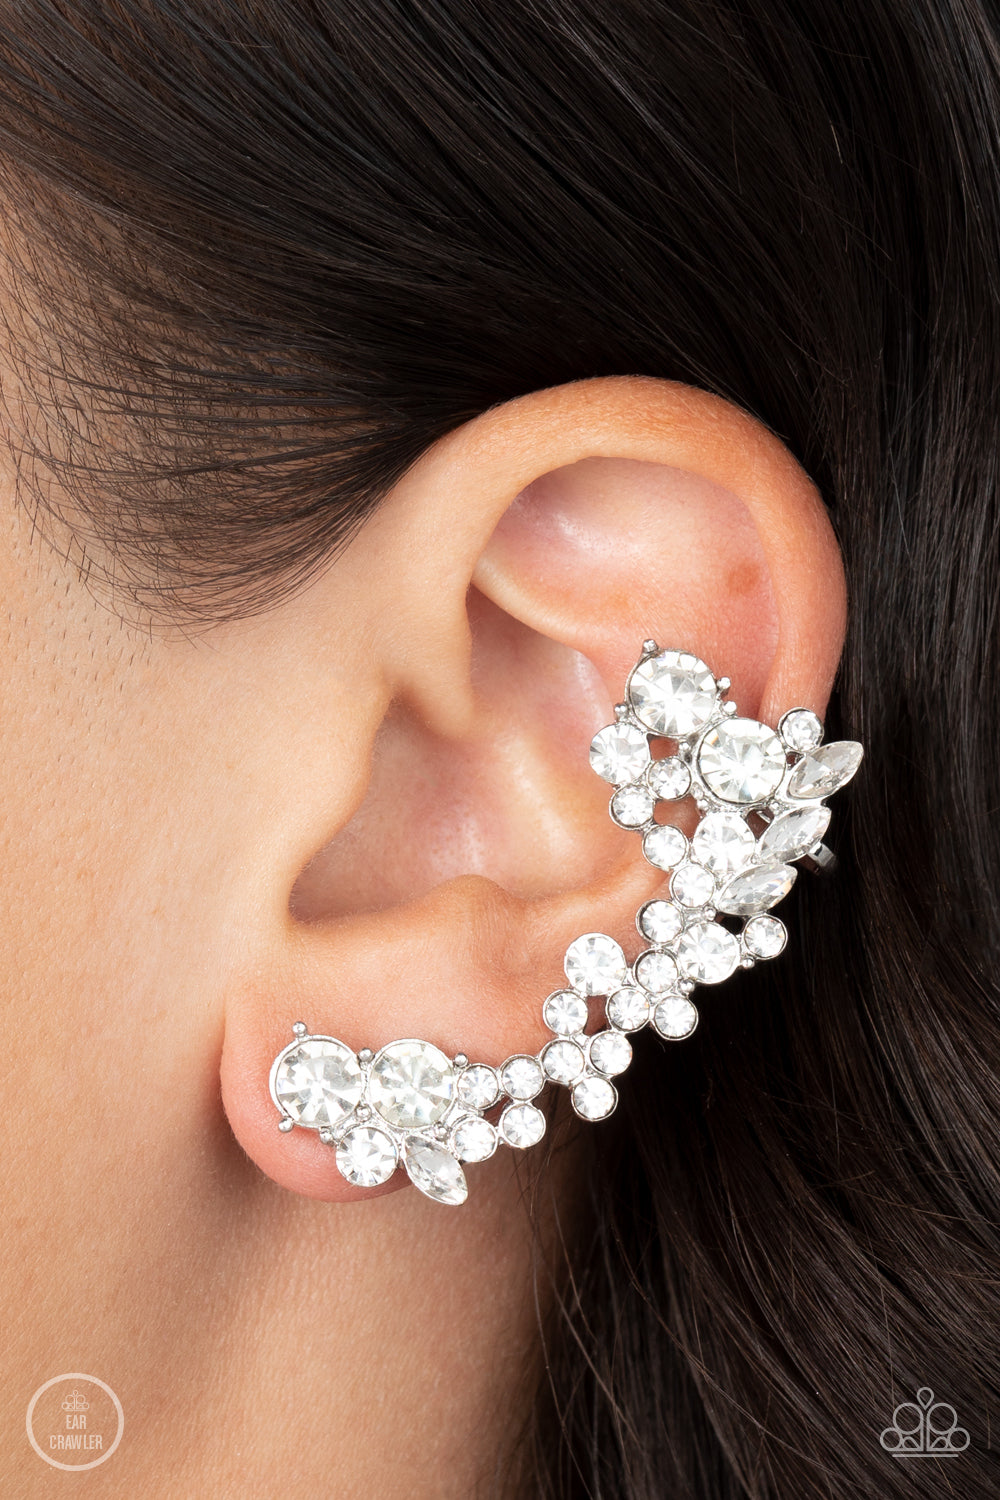 Astronomical Allure White Earrings Paparazzi